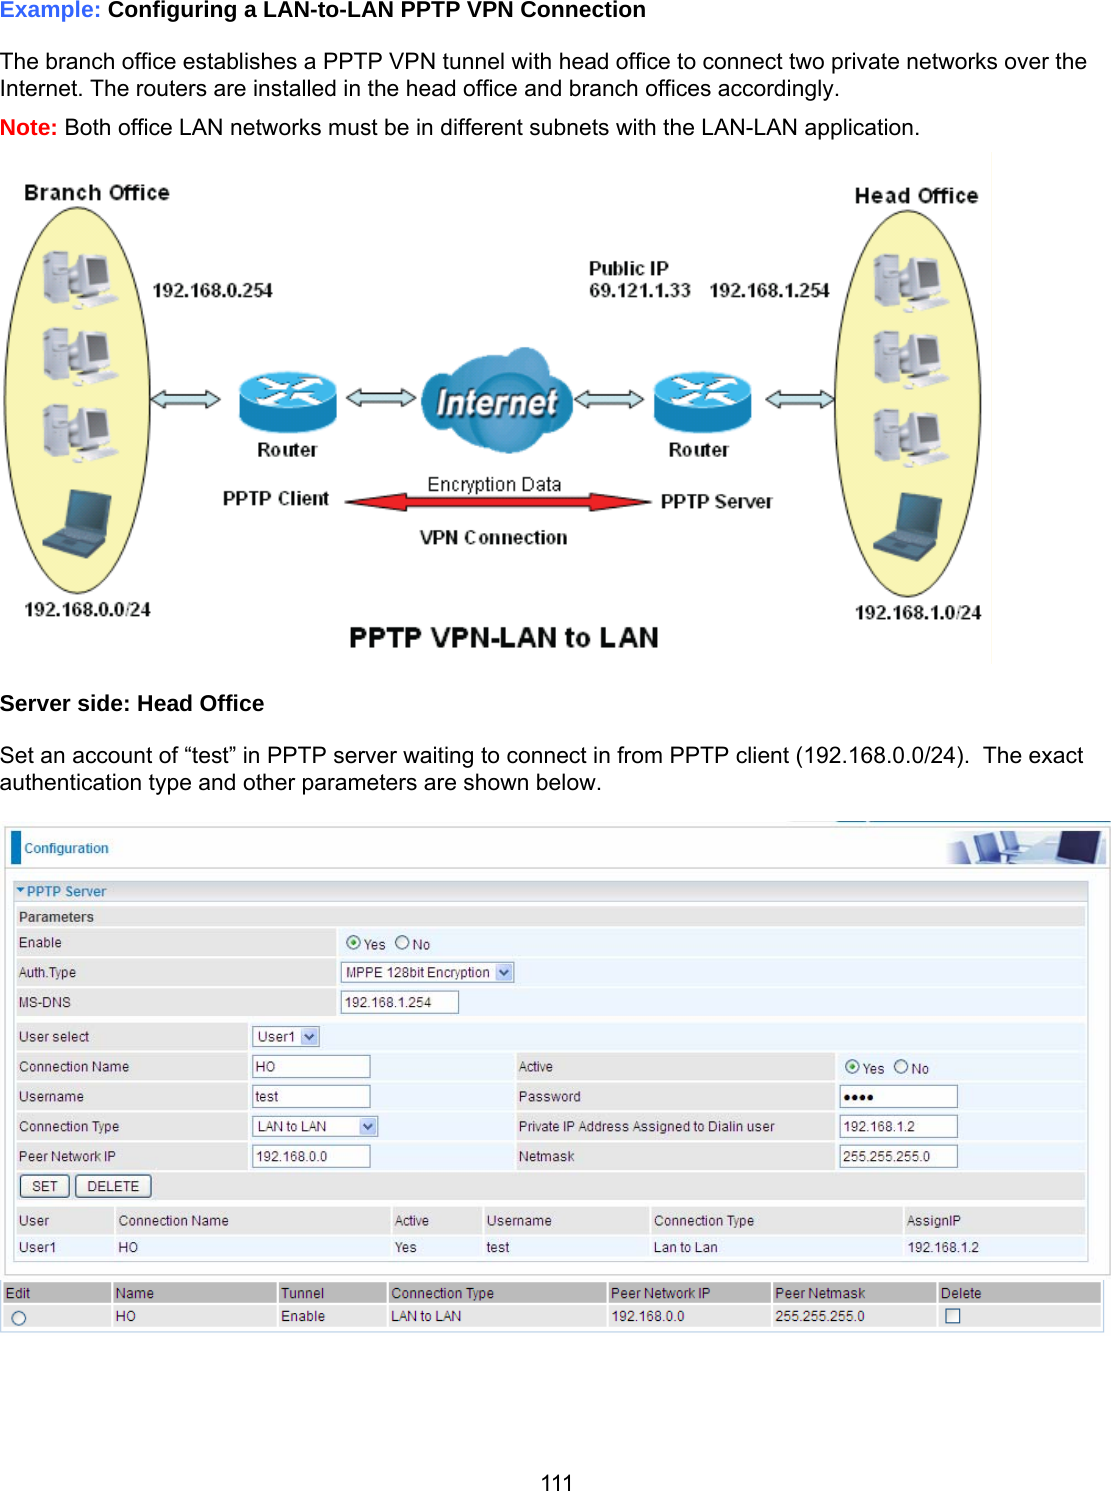 111 Example: Configuring a LAN-to-LAN PPTP VPN Connection  The branch office establishes a PPTP VPN tunnel with head office to connect two private networks over the Internet. The routers are installed in the head office and branch offices accordingly. Note: Both office LAN networks must be in different subnets with the LAN-LAN application.   Server side: Head Office  Set an account of “test” in PPTP server waiting to connect in from PPTP client (192.168.0.0/24).  The exact authentication type and other parameters are shown below.        